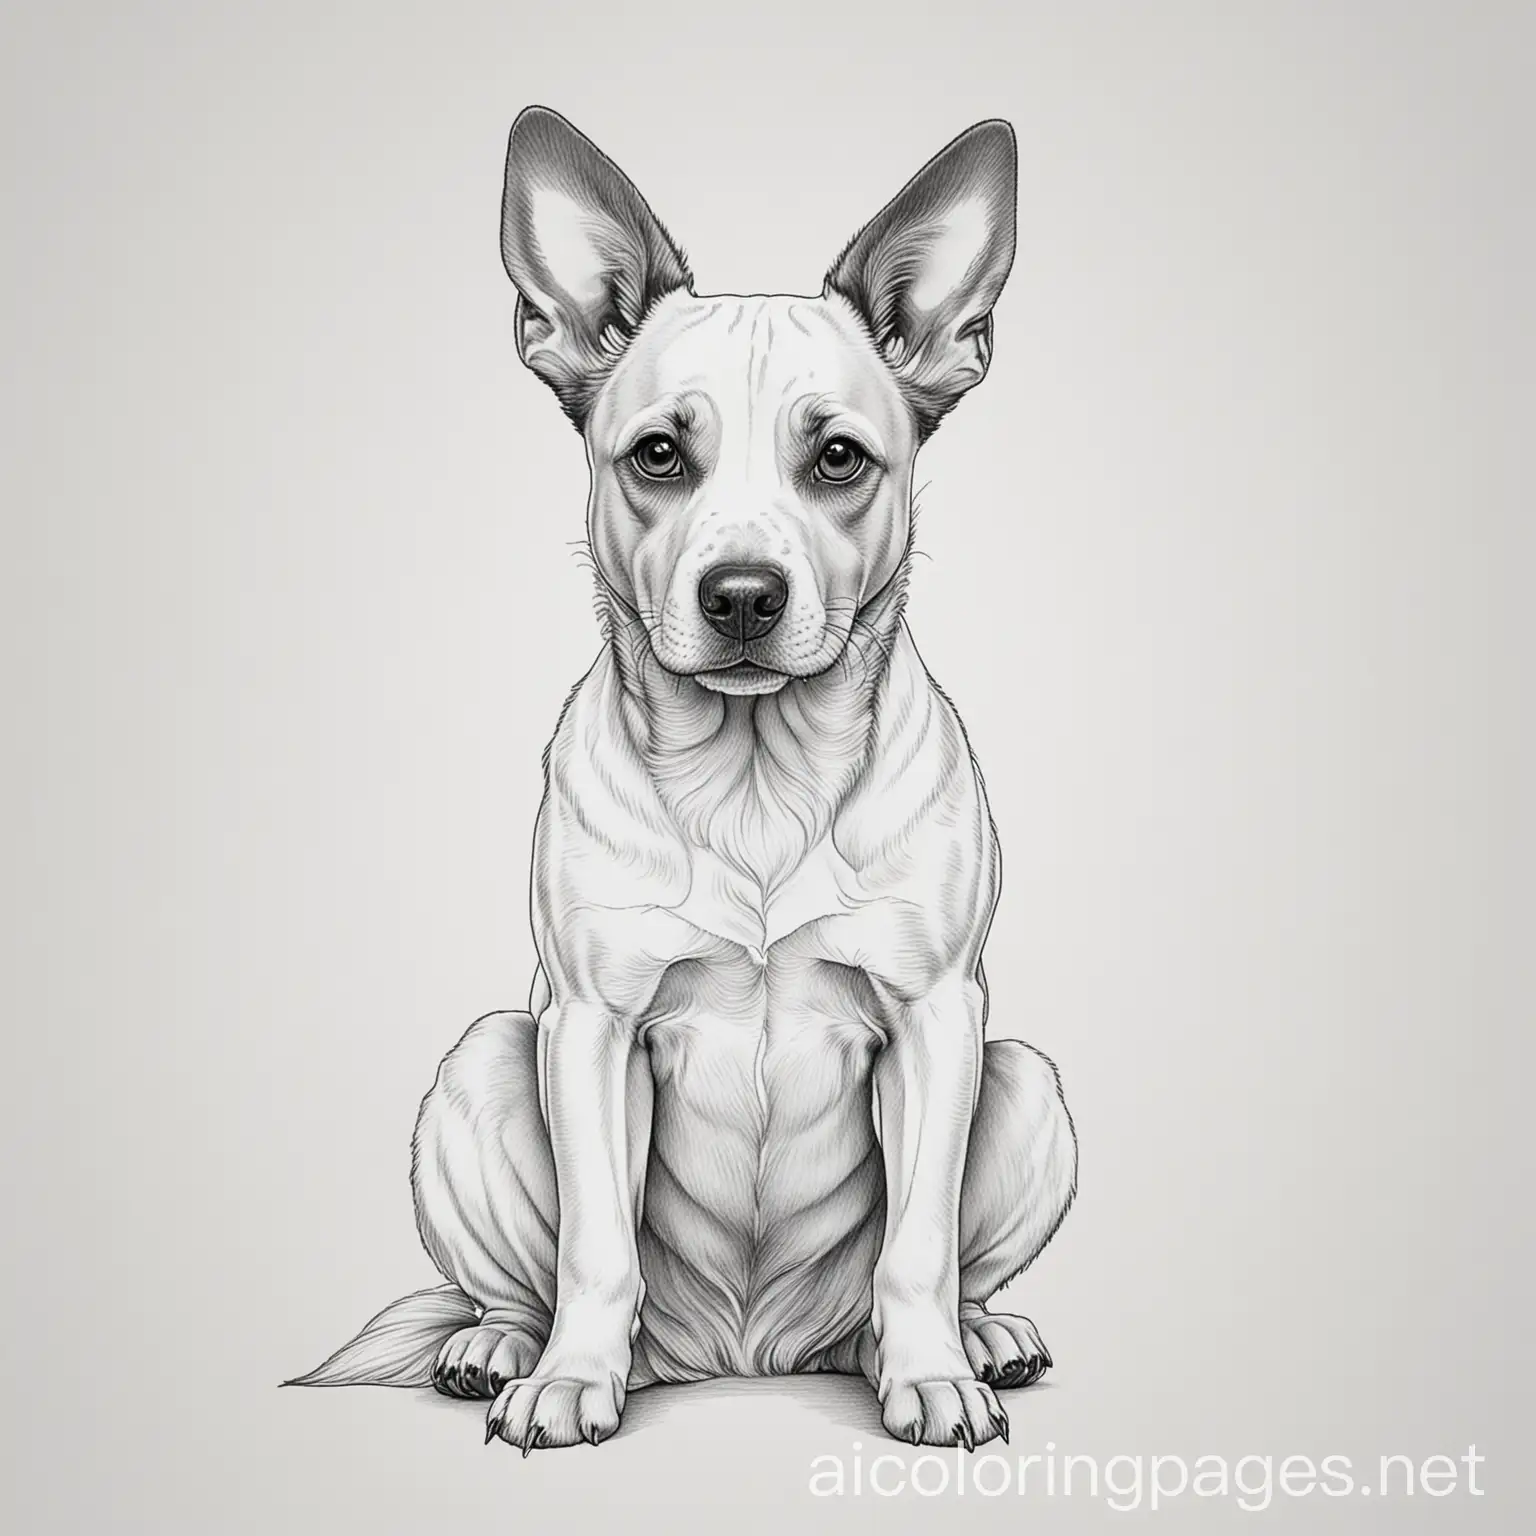 Simple-Black-and-White-Dog-Coloring-Page-with-Ample-White-Space